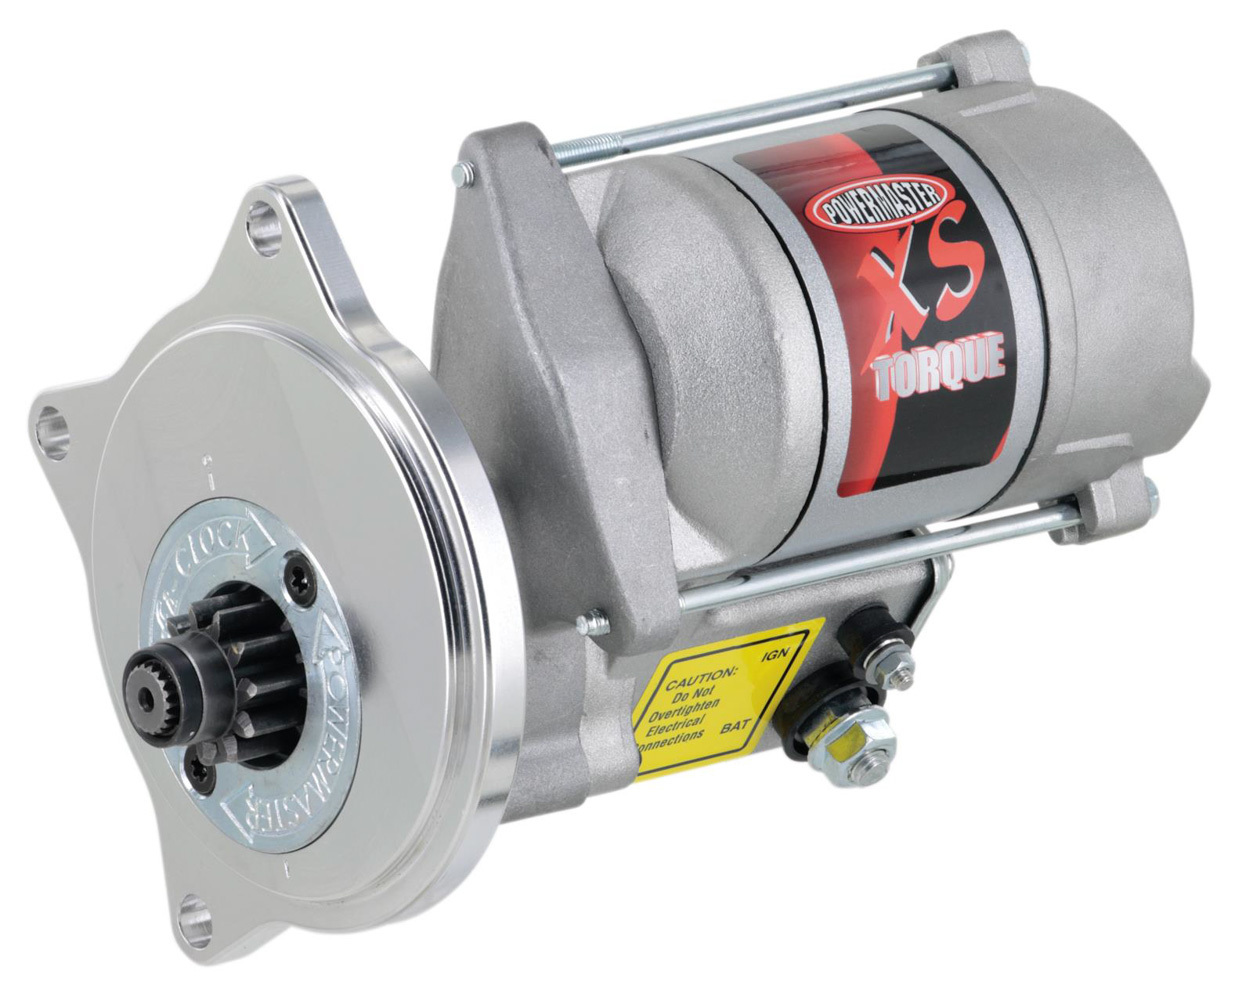 Powermaster Performance 9506M Starter, XS Torque, 4.4:1 Gear Reduction, Natural, Ford FE-Series, Each